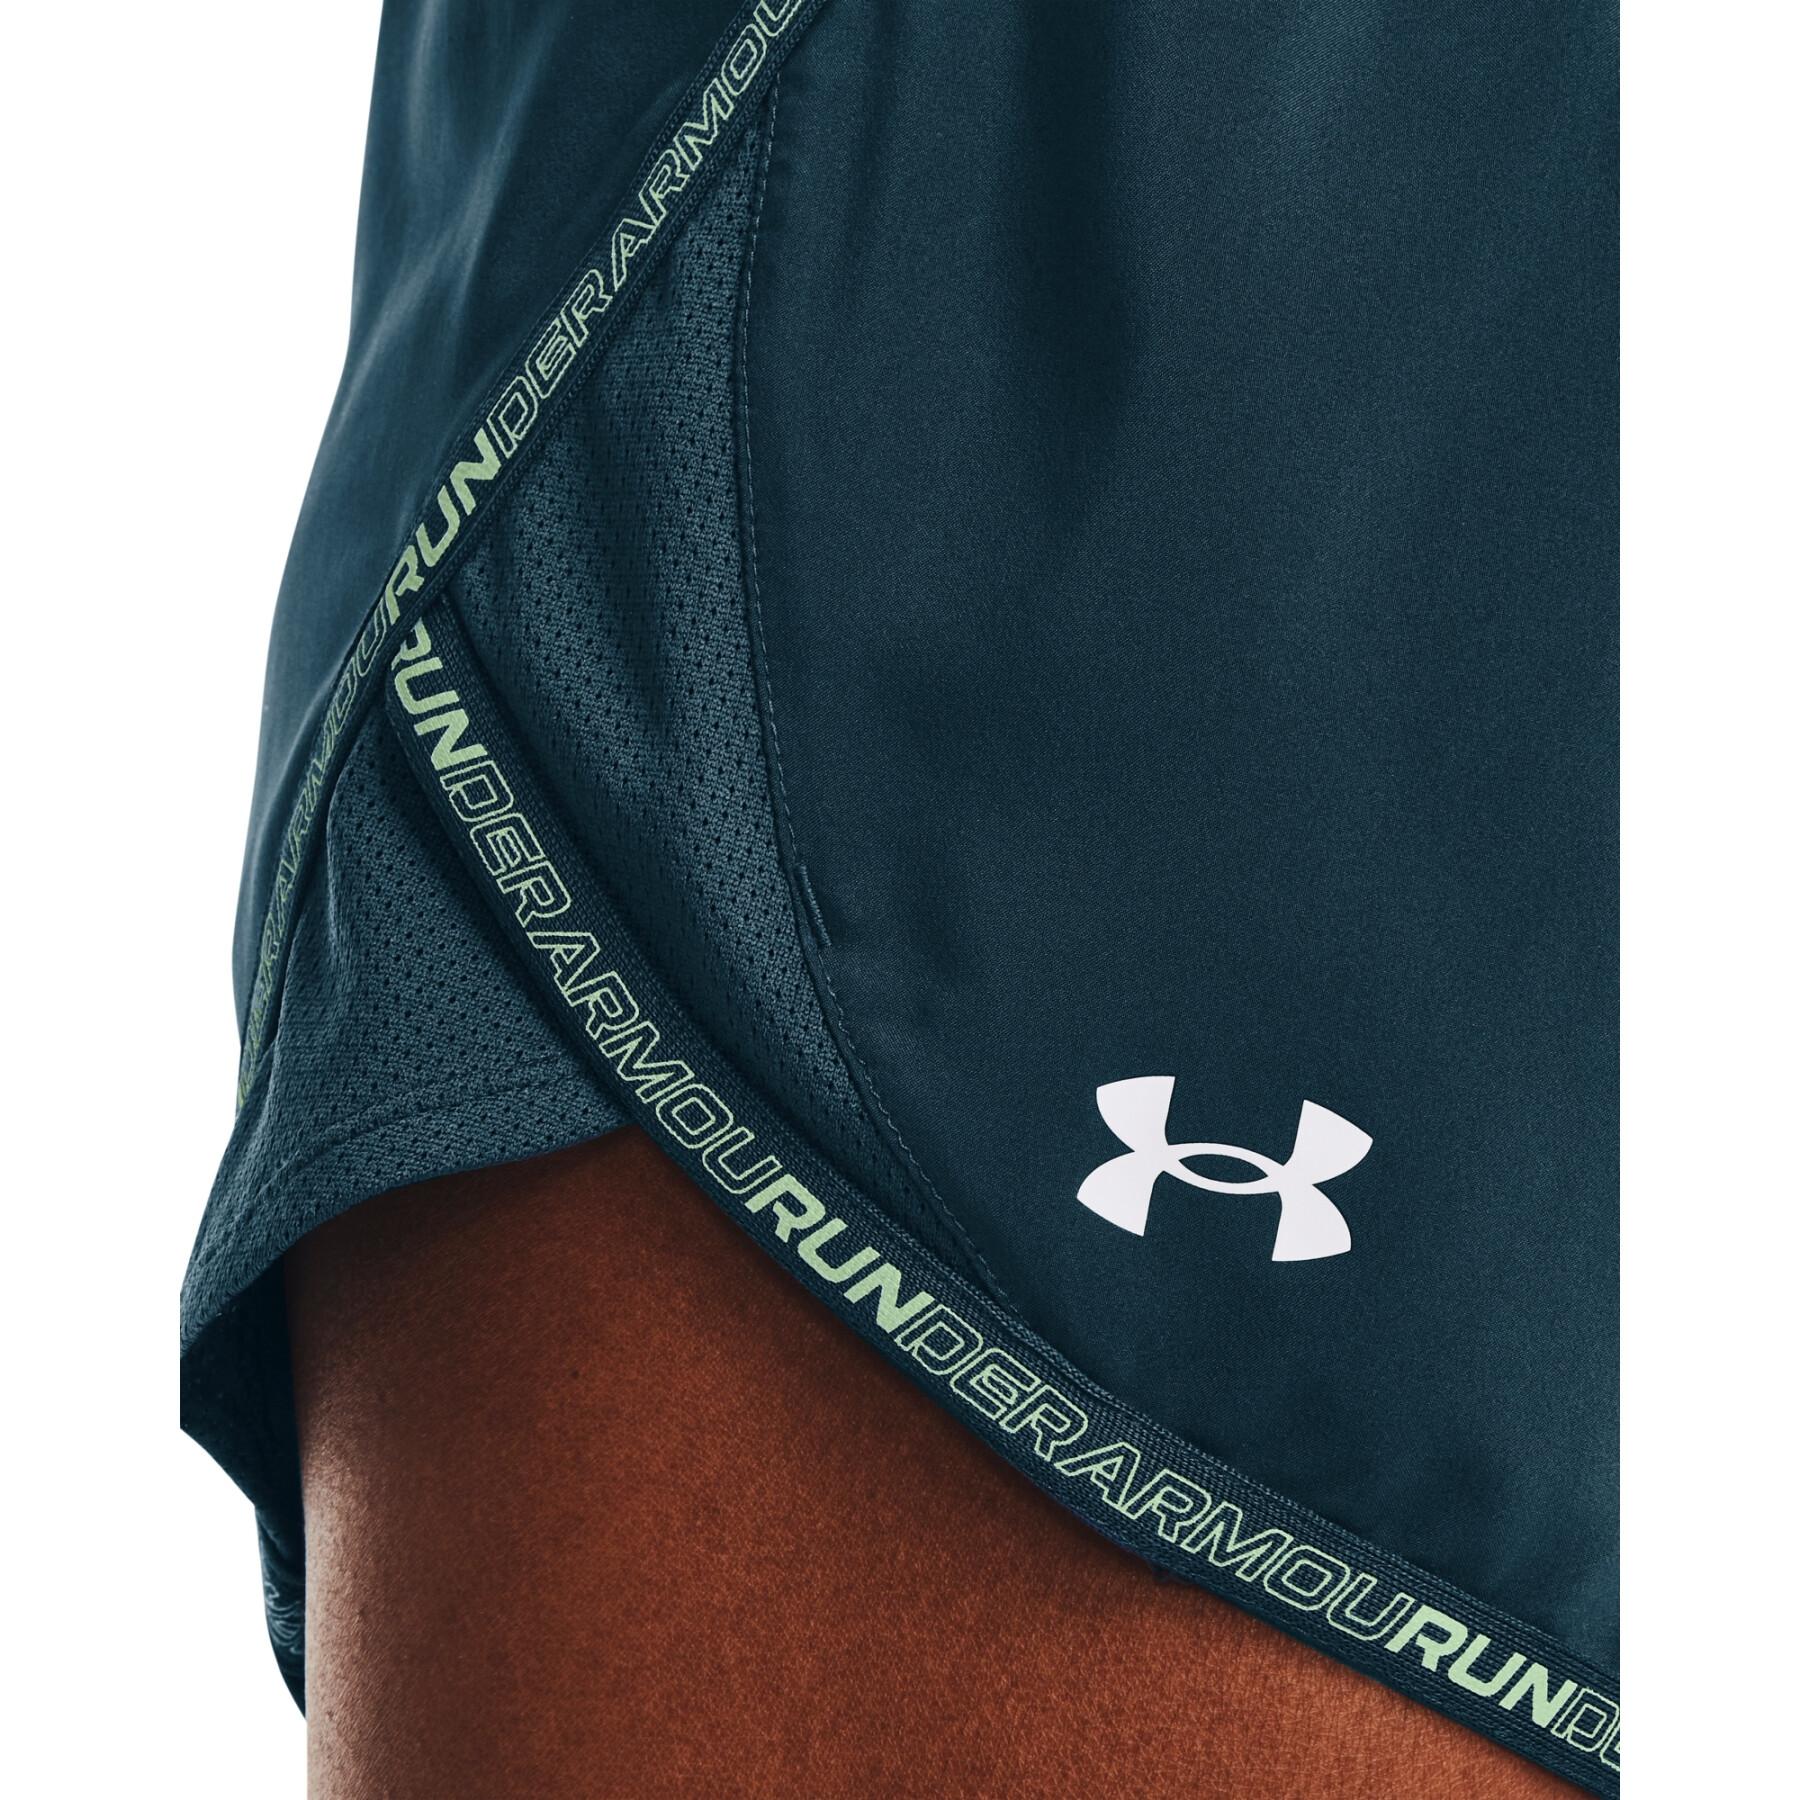 Short femme Under Armour Fly-By 2.0 Brand